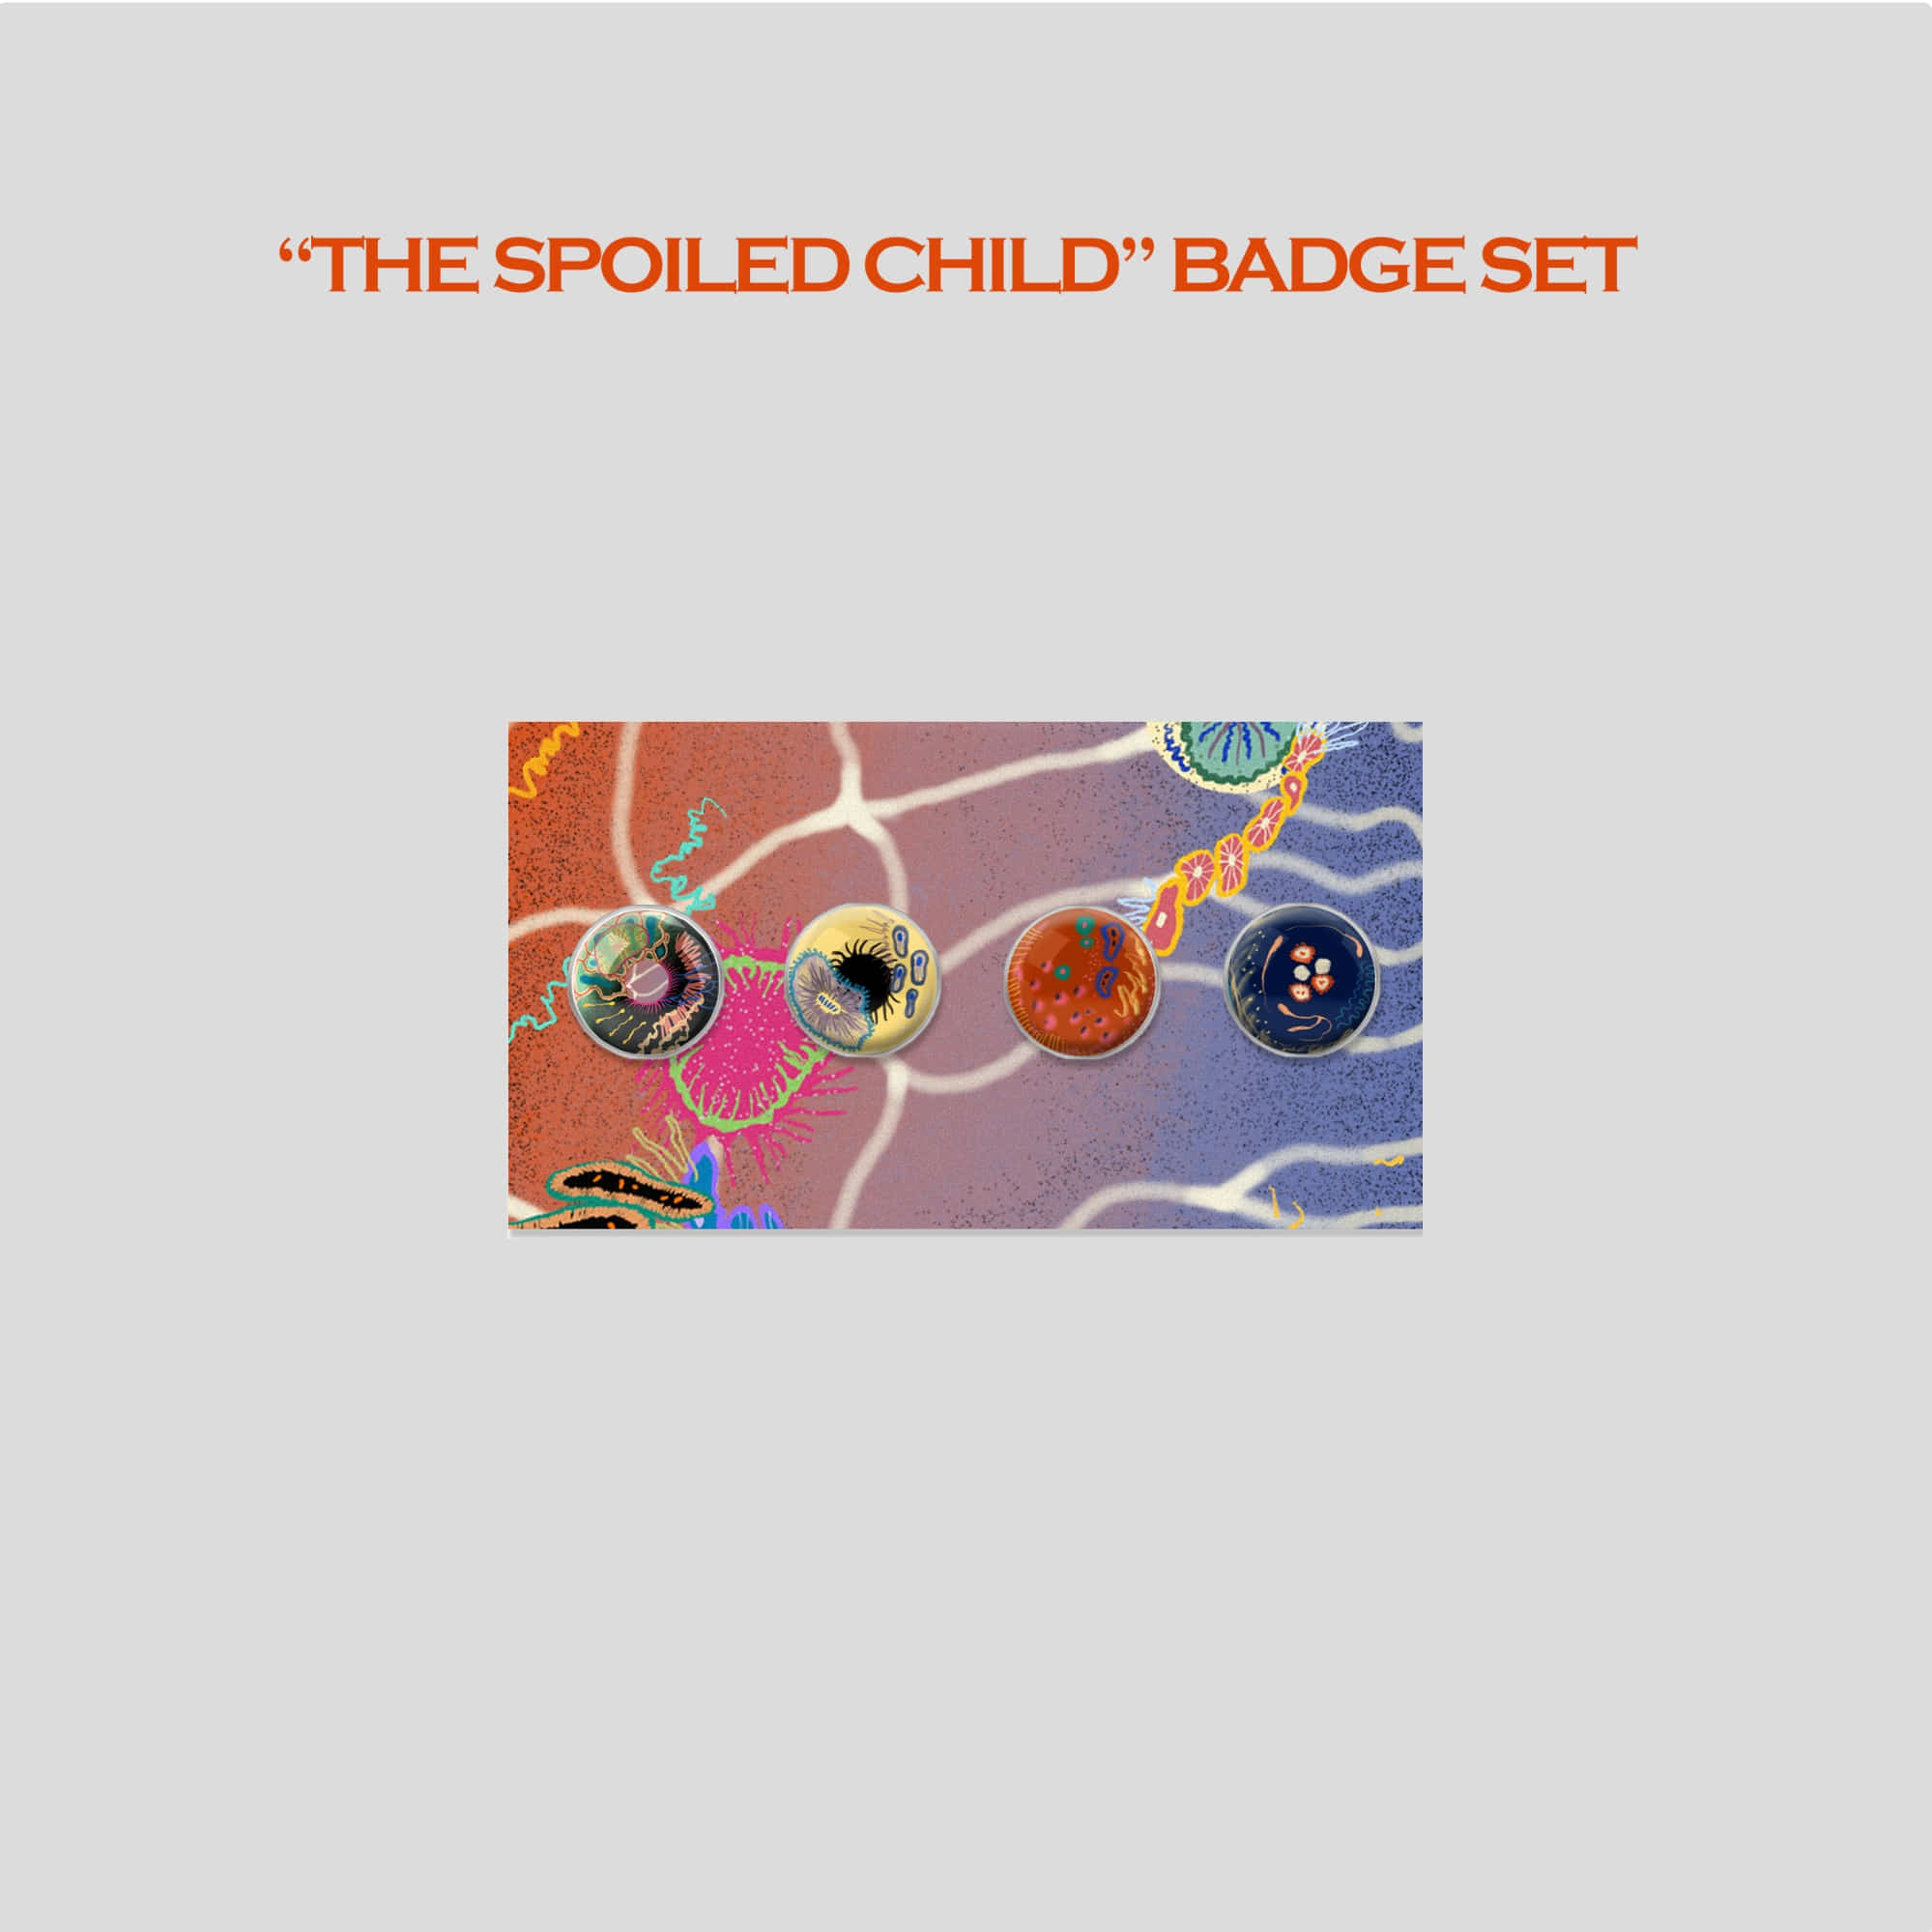 &quot;THE SPOILED CHILD&#039; BADGE SET